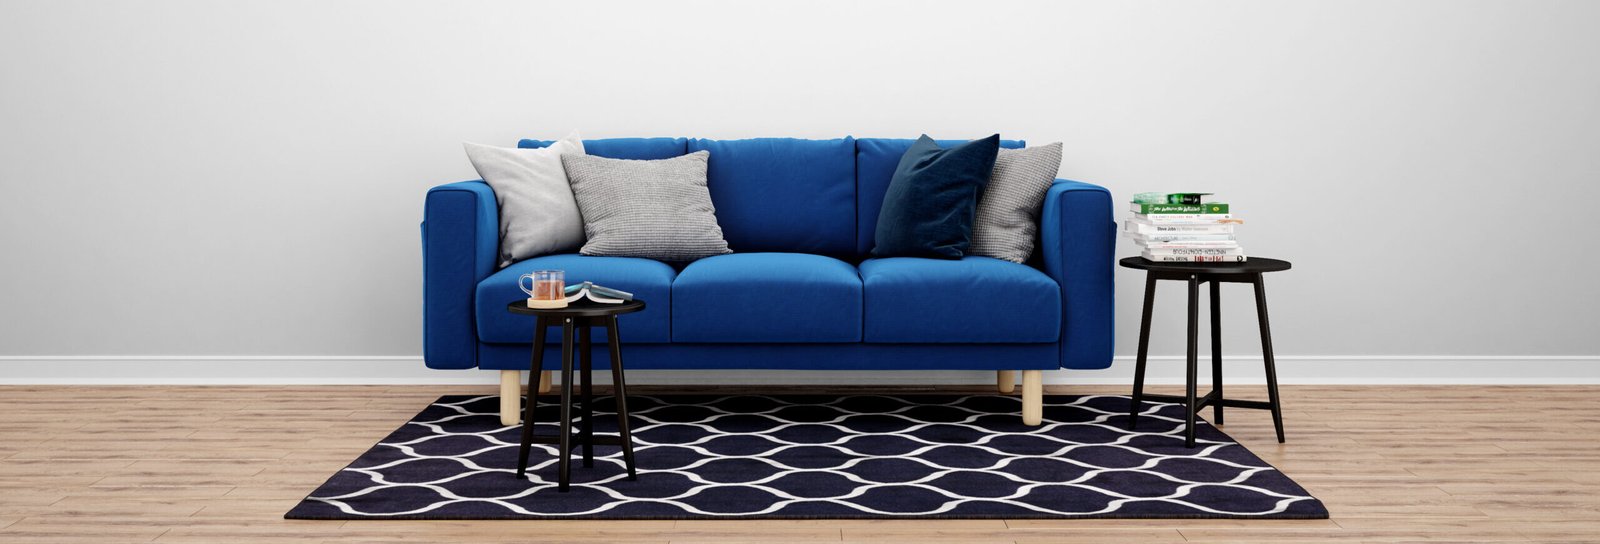 How to find the perfect sofa set for your home